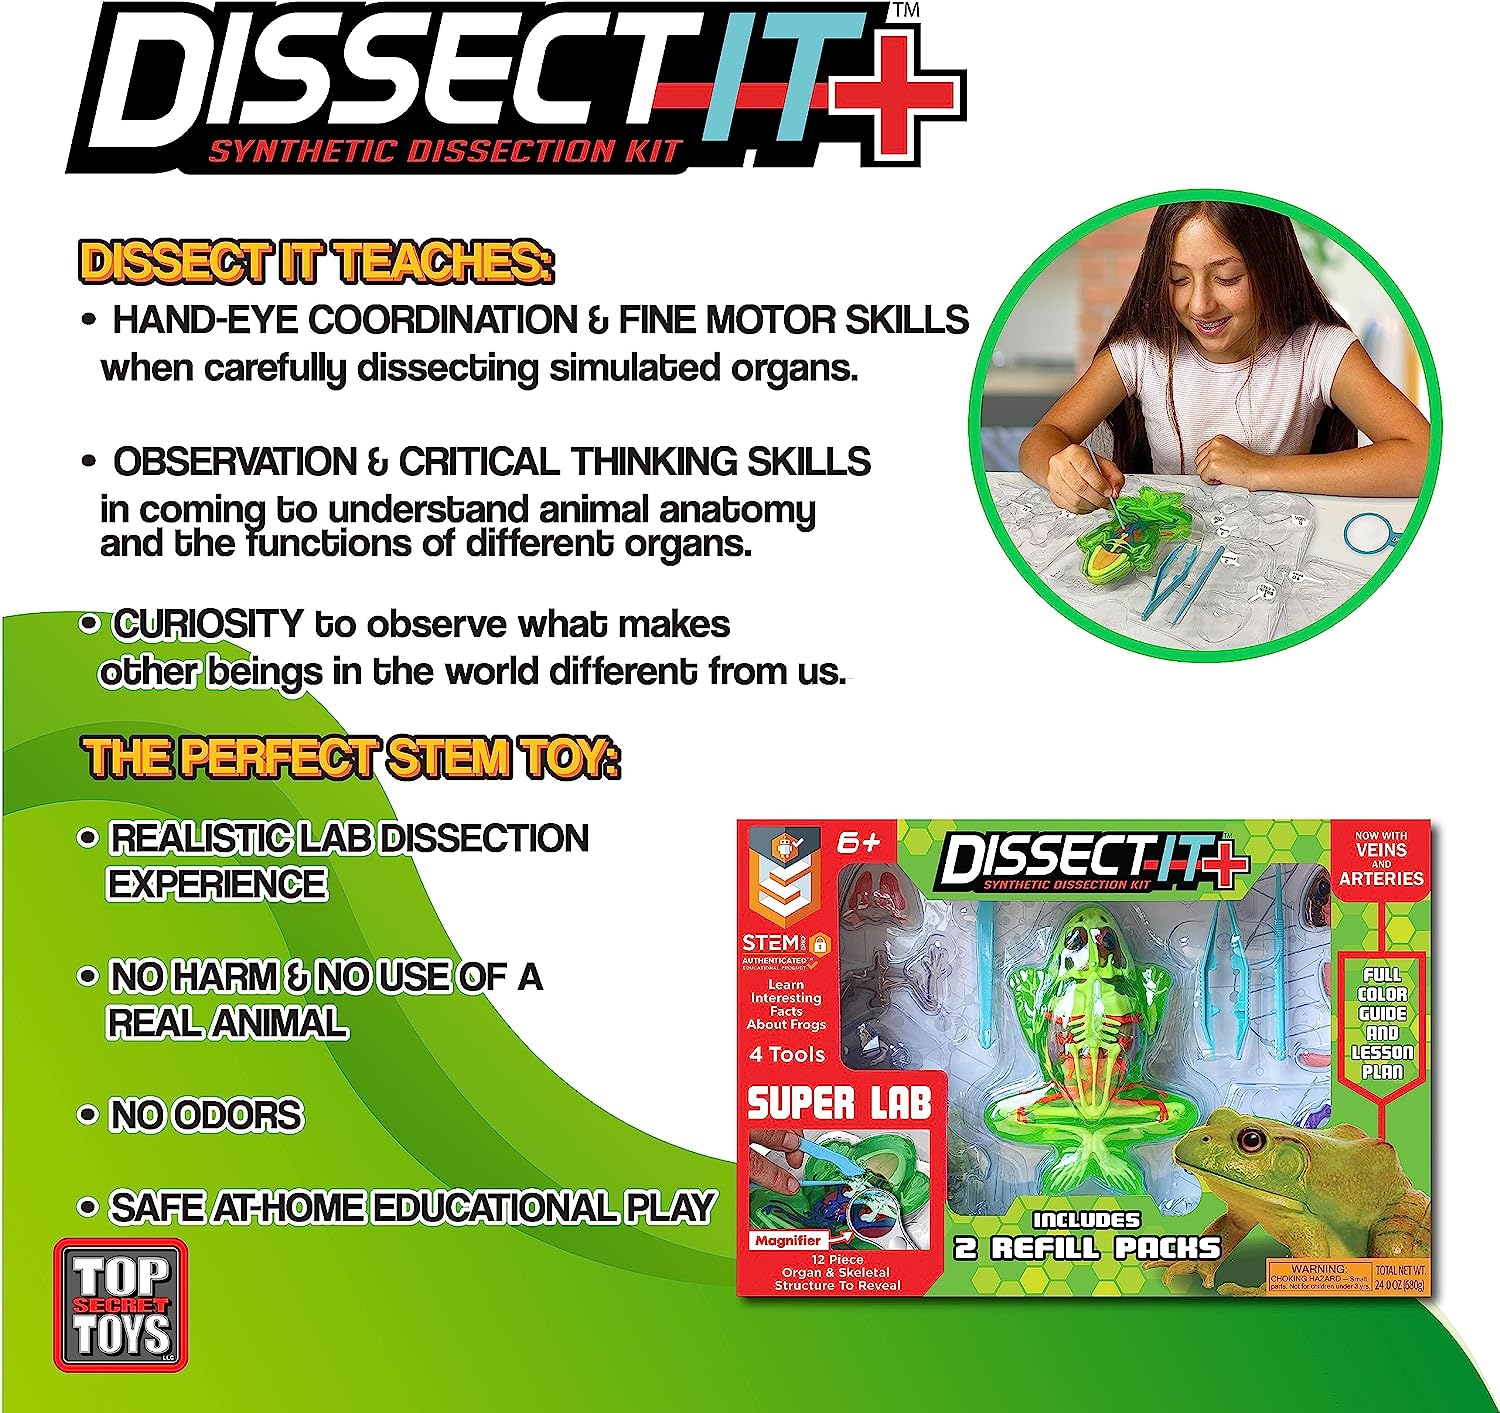 Dissect-It Super Frog Lab by Tangle Creations #TST-1085